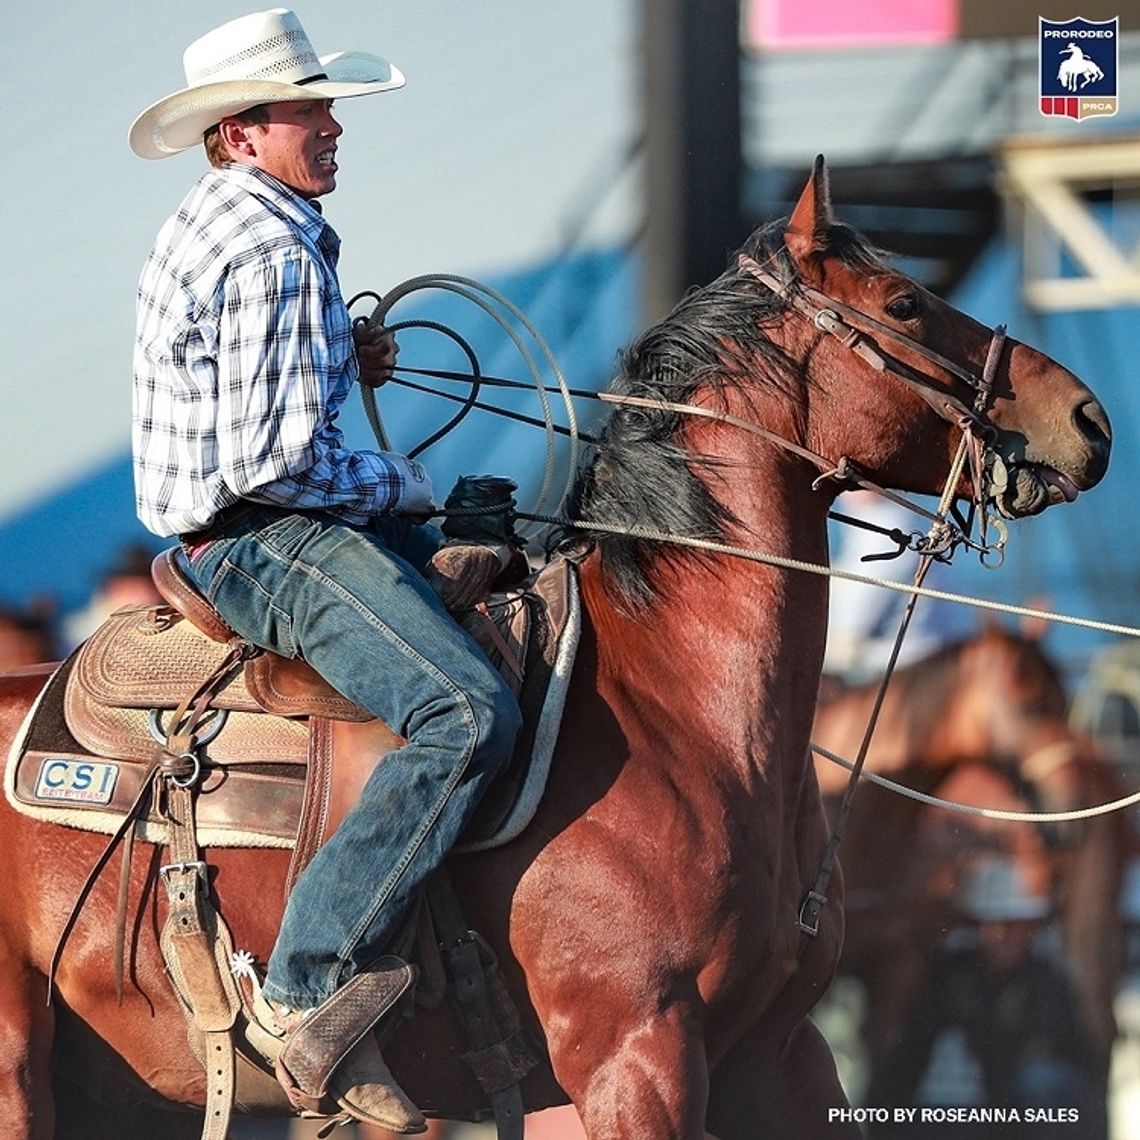 Fallon roper on his way to PRCA Rookie of the Year award